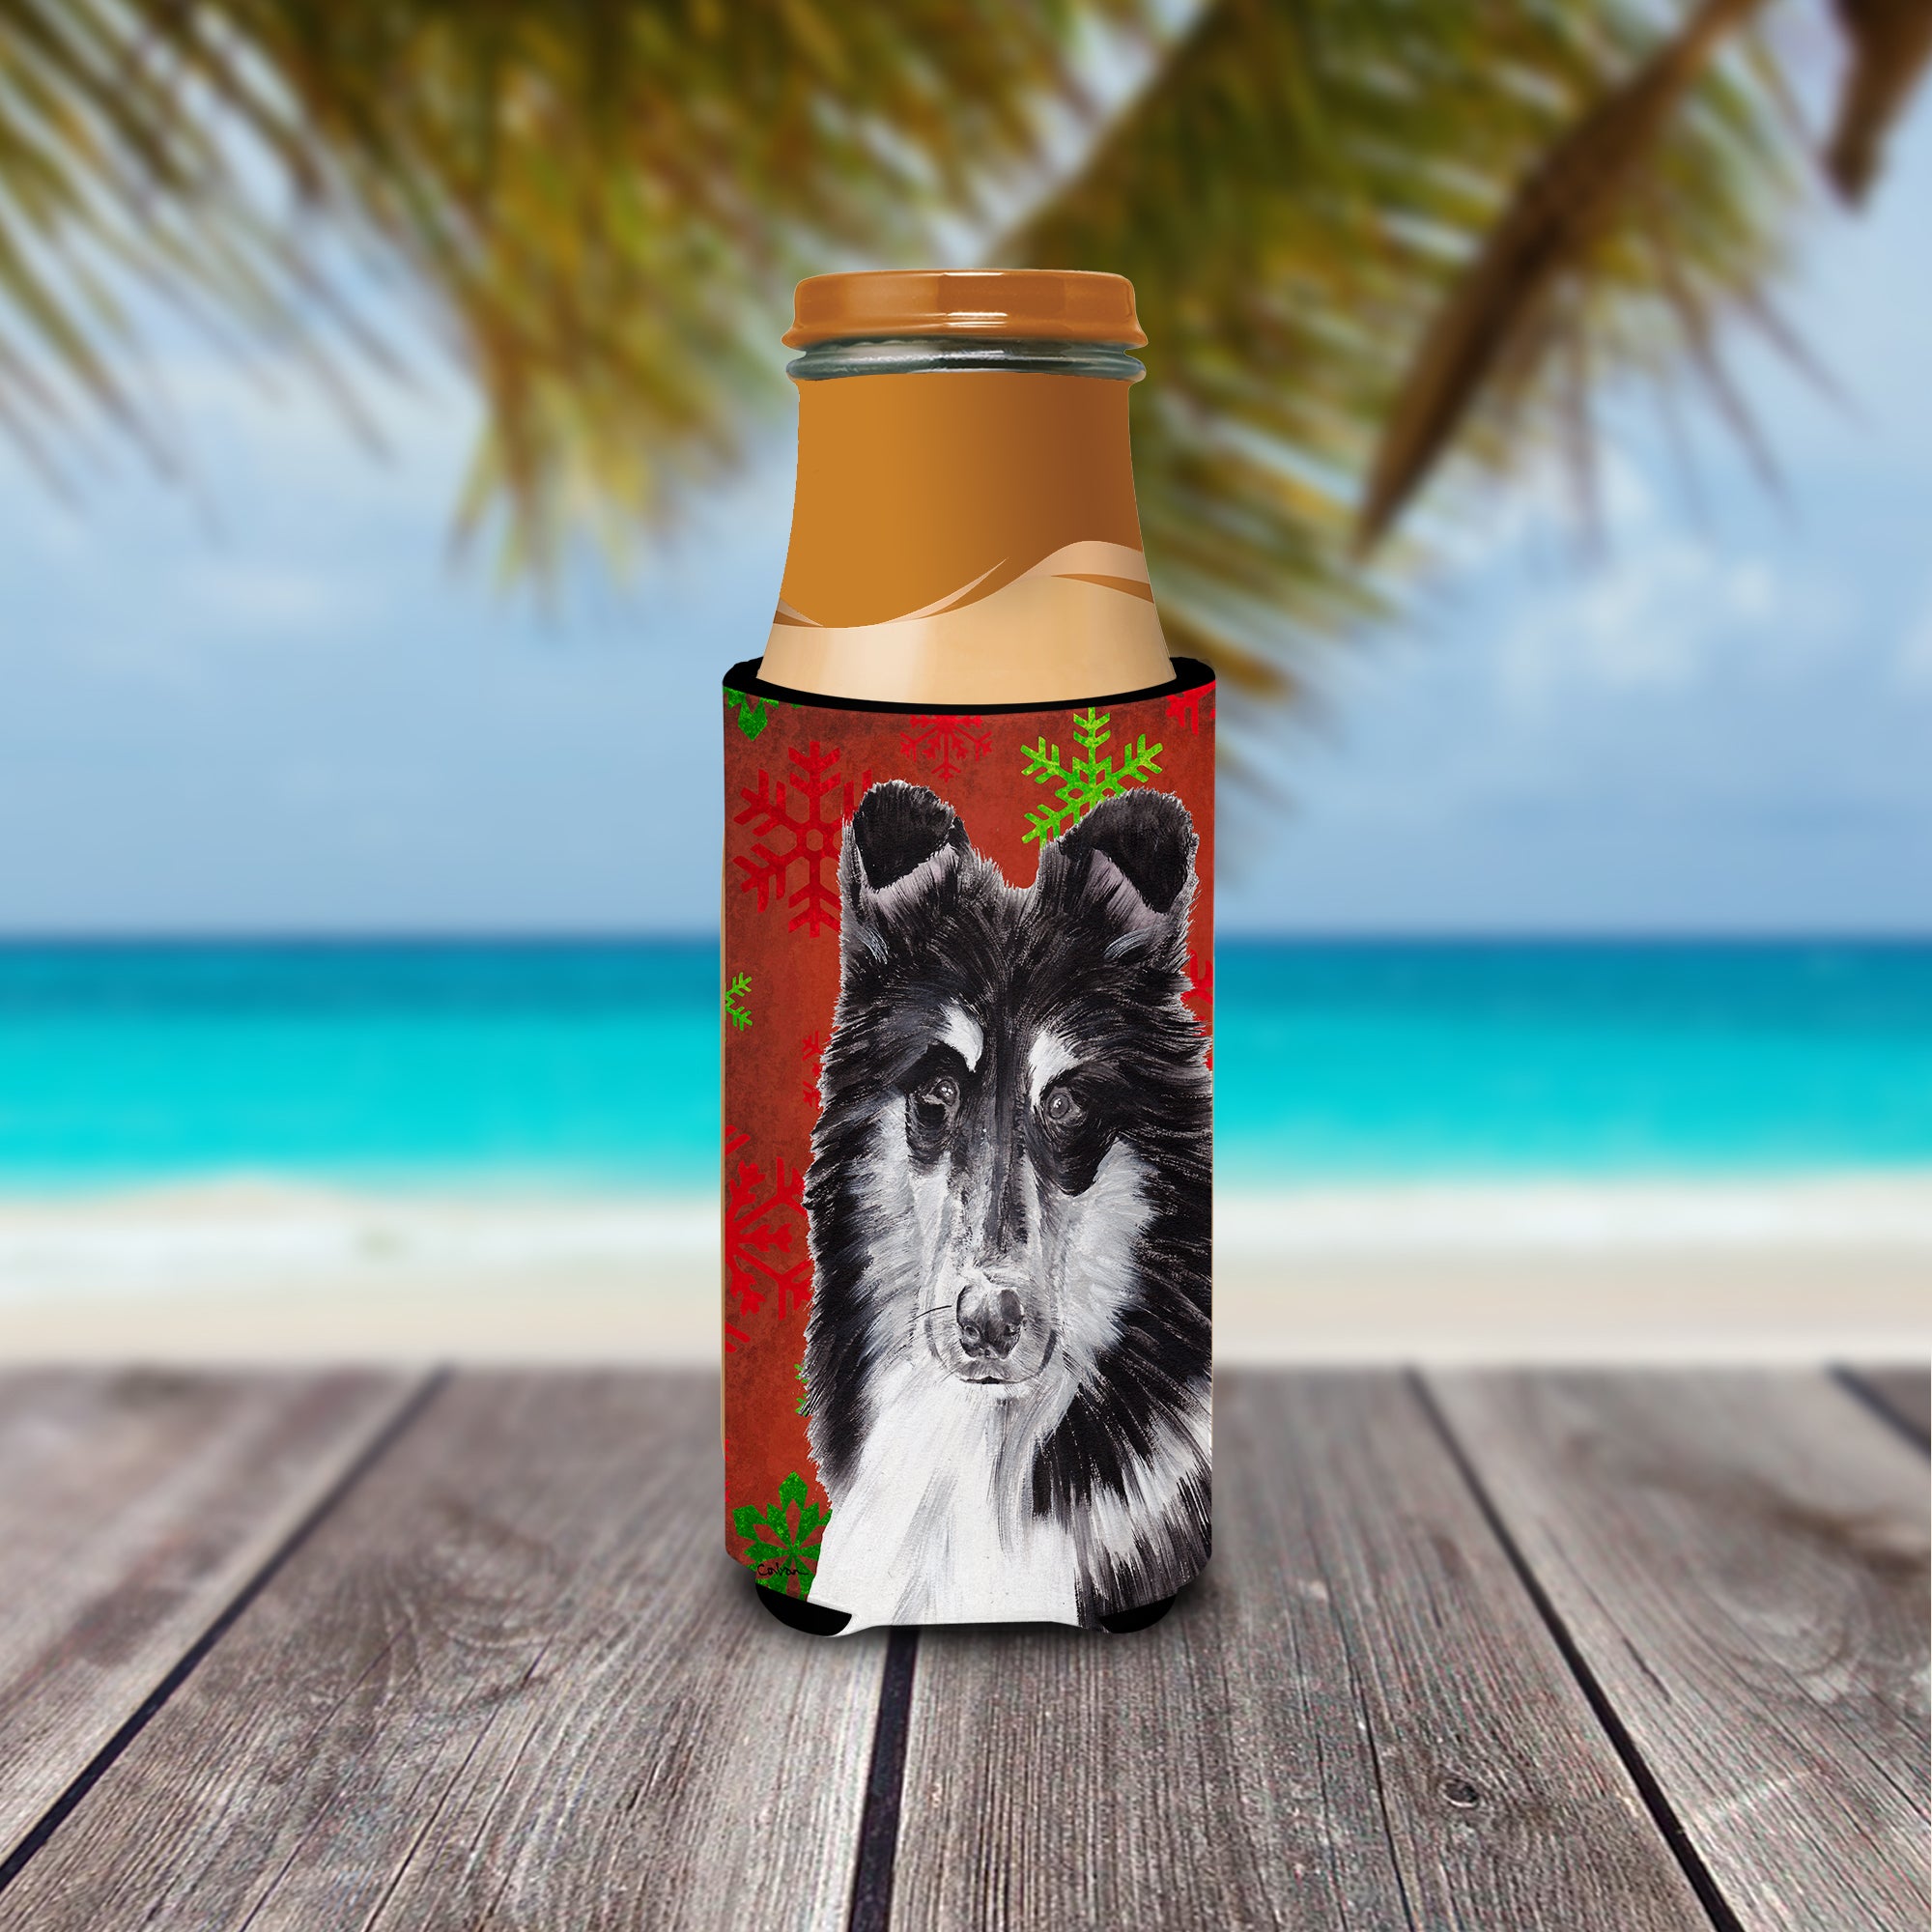 Black and White Collie Red Snowflakes Holiday Ultra Beverage Insulators for slim cans SC9750MUK.